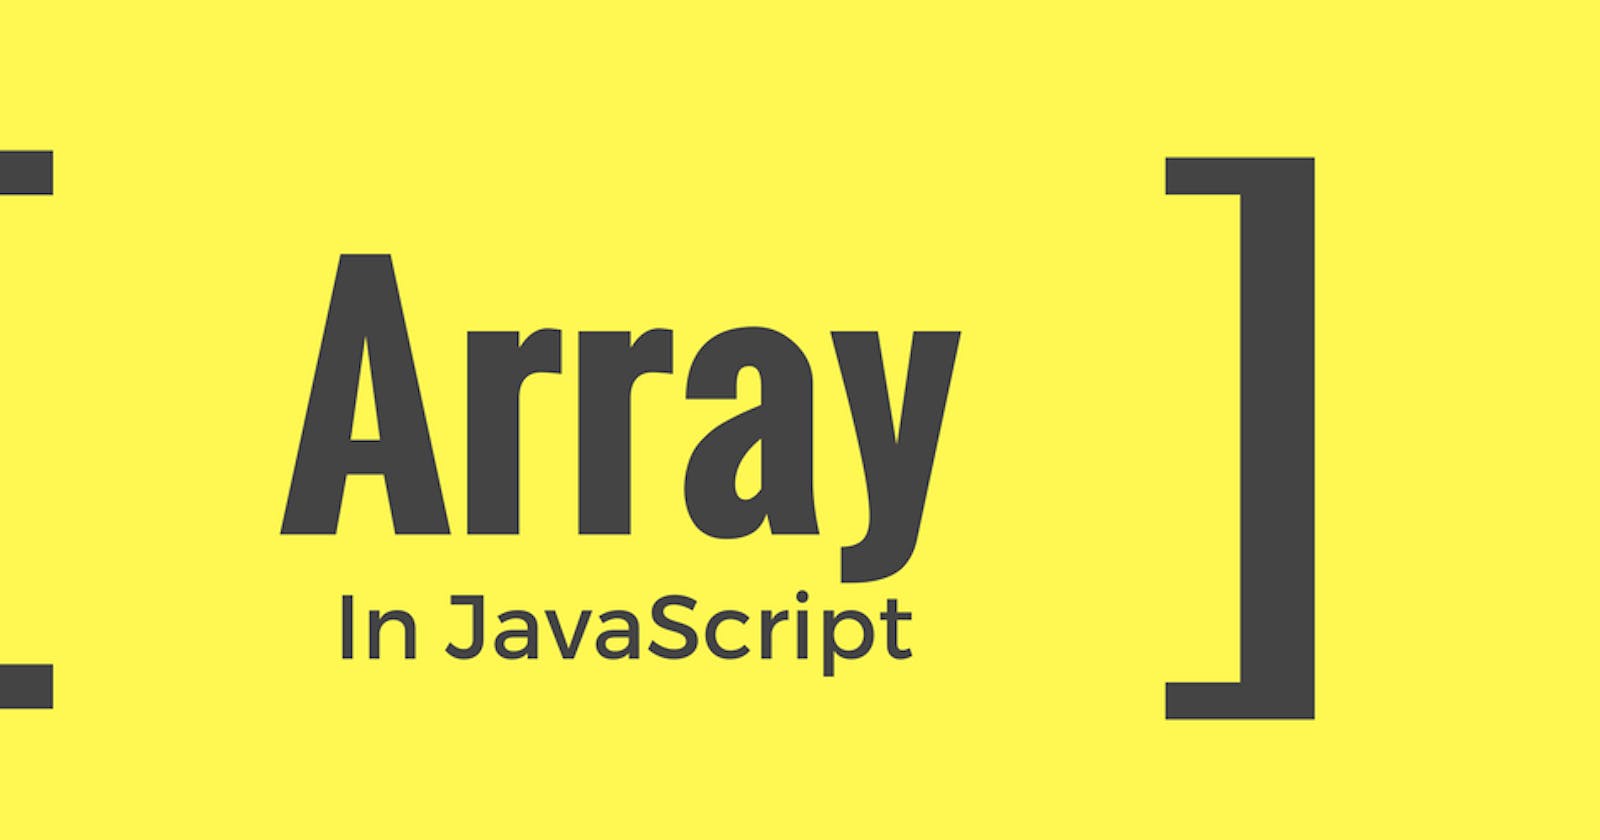 Capture Collection Of Data With Arrays in javaScript.